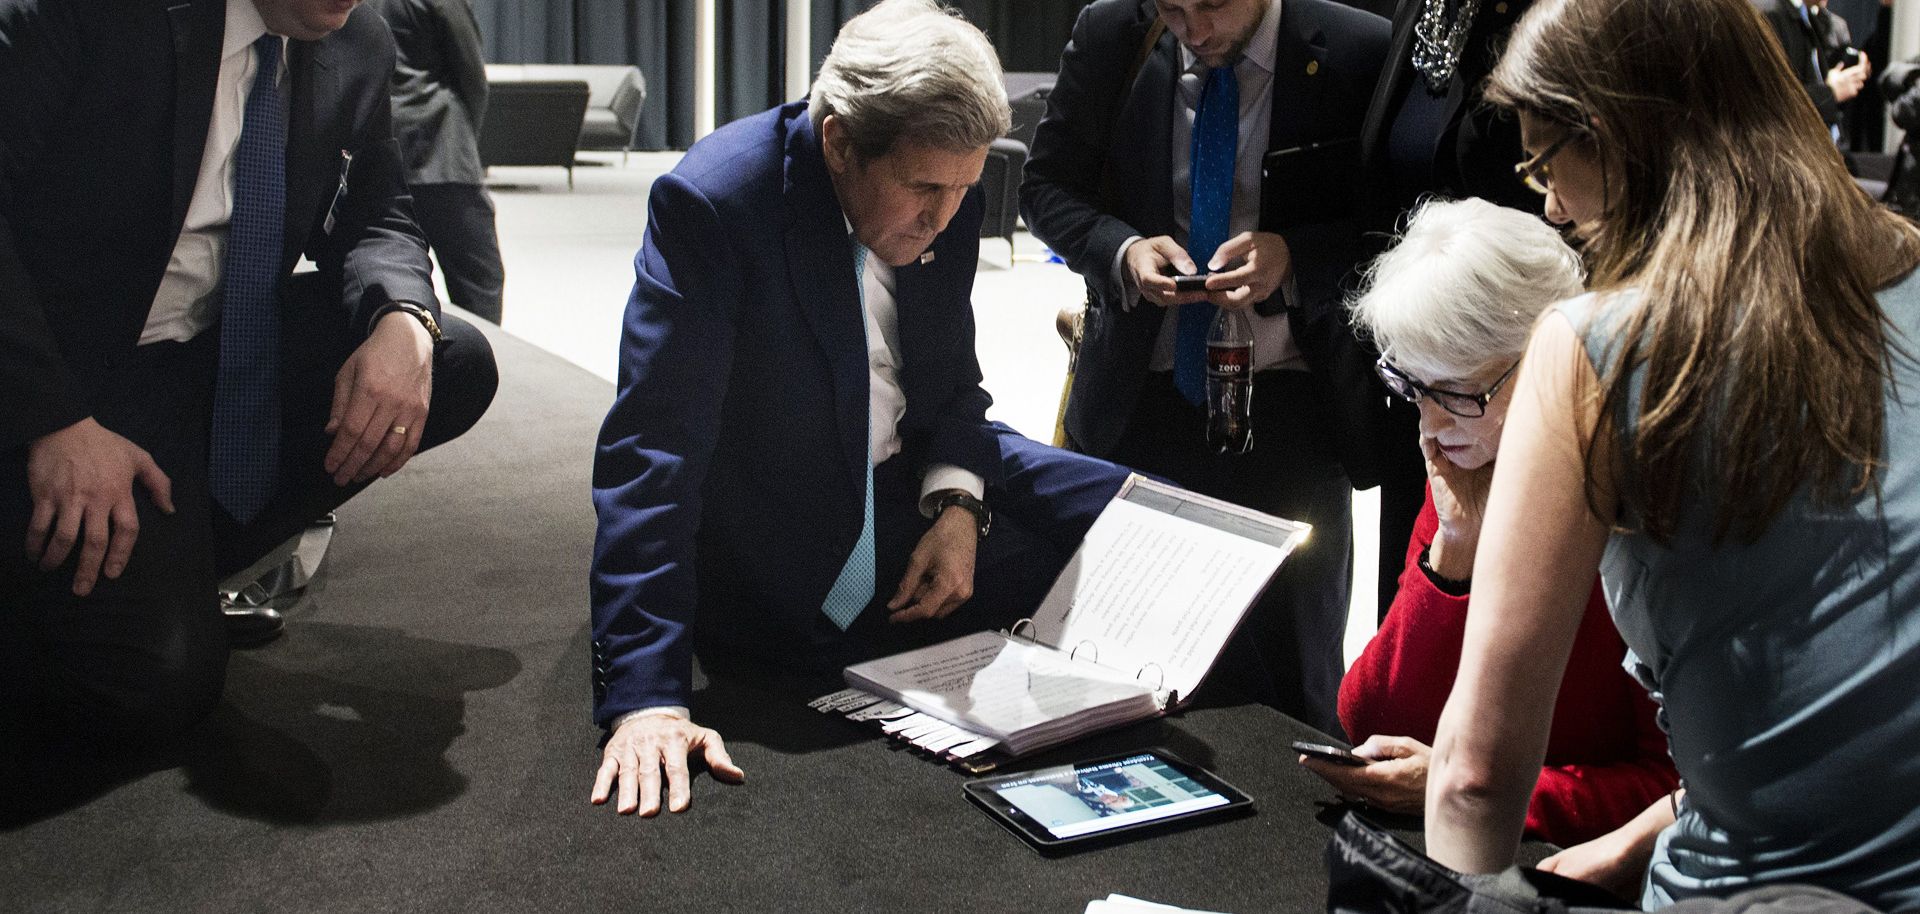 U.S. Secretary of State John Kerry (2nd L) watches the President of the United States address the nation after Iran nuclear program talks finished with extended sessions in Lausanne, Switzerland, April 2.